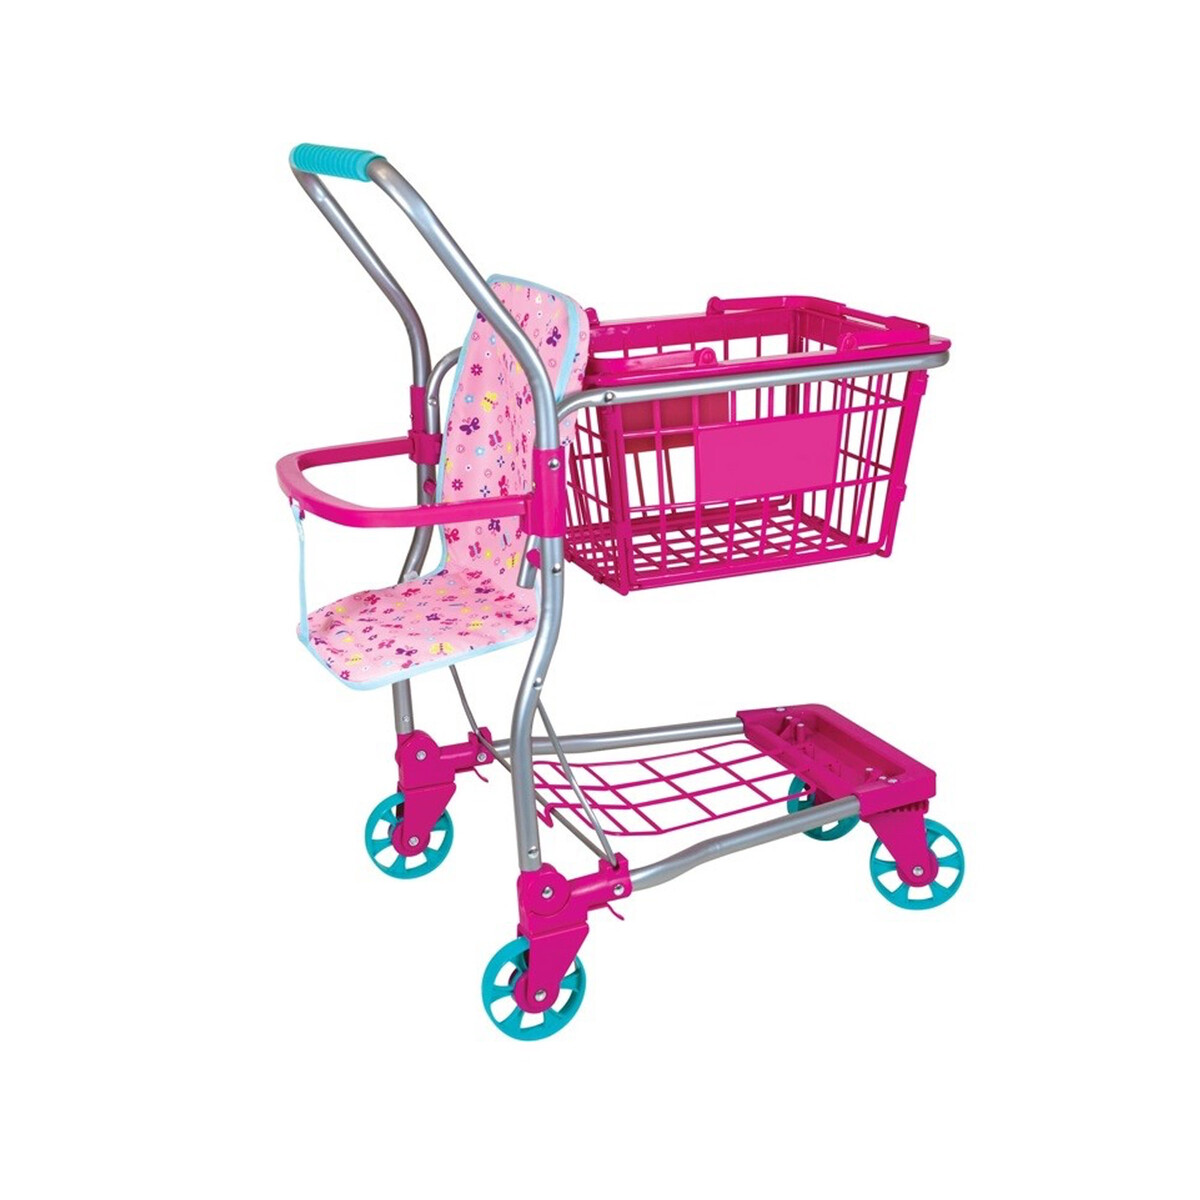 Lissi Doll With Shopping Cart 66816